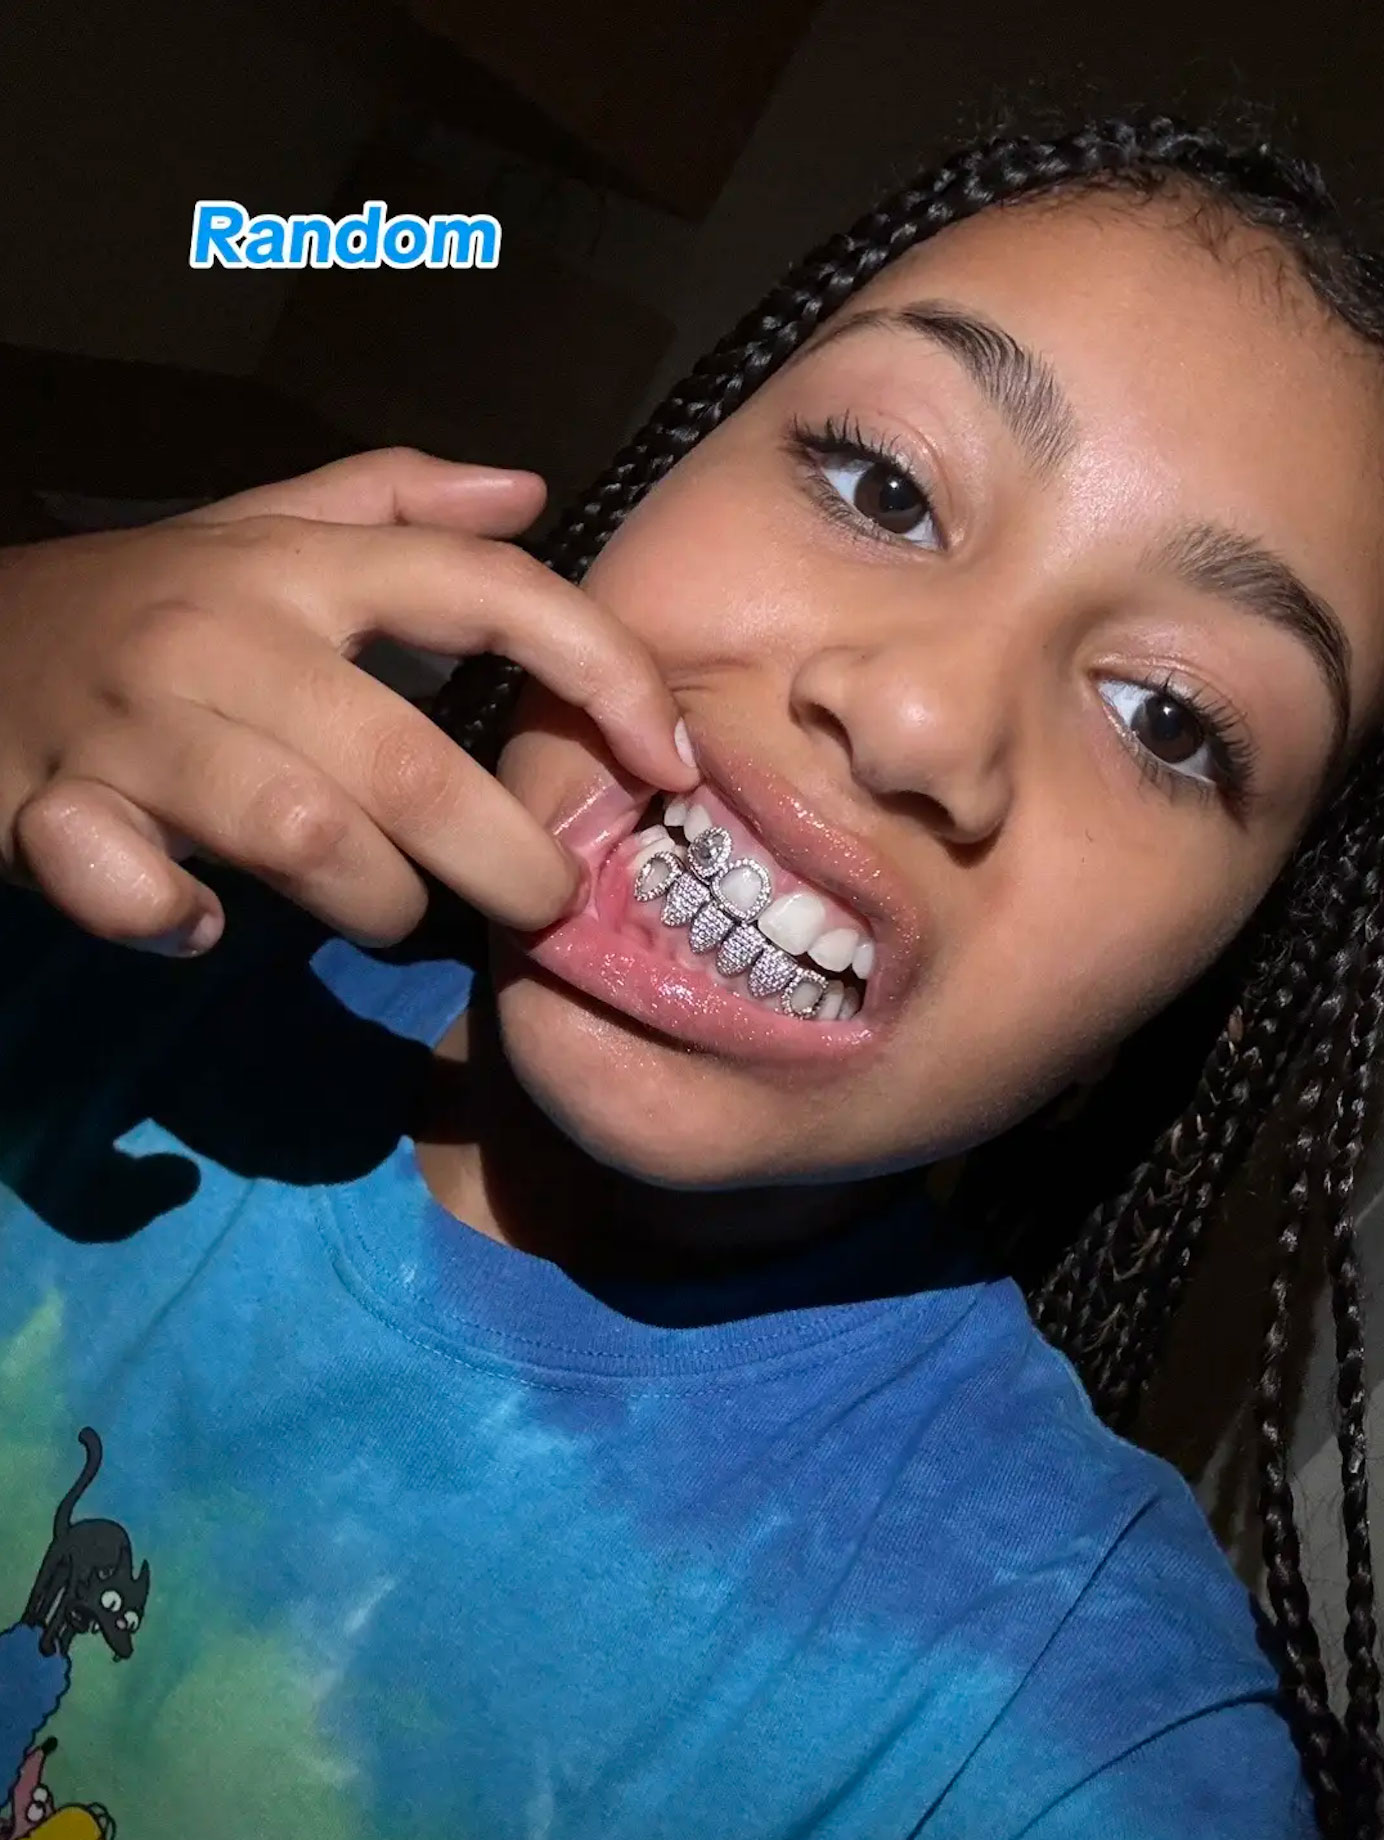 The pre-teen had eight of her front teeth encrusted in tiny diamonds